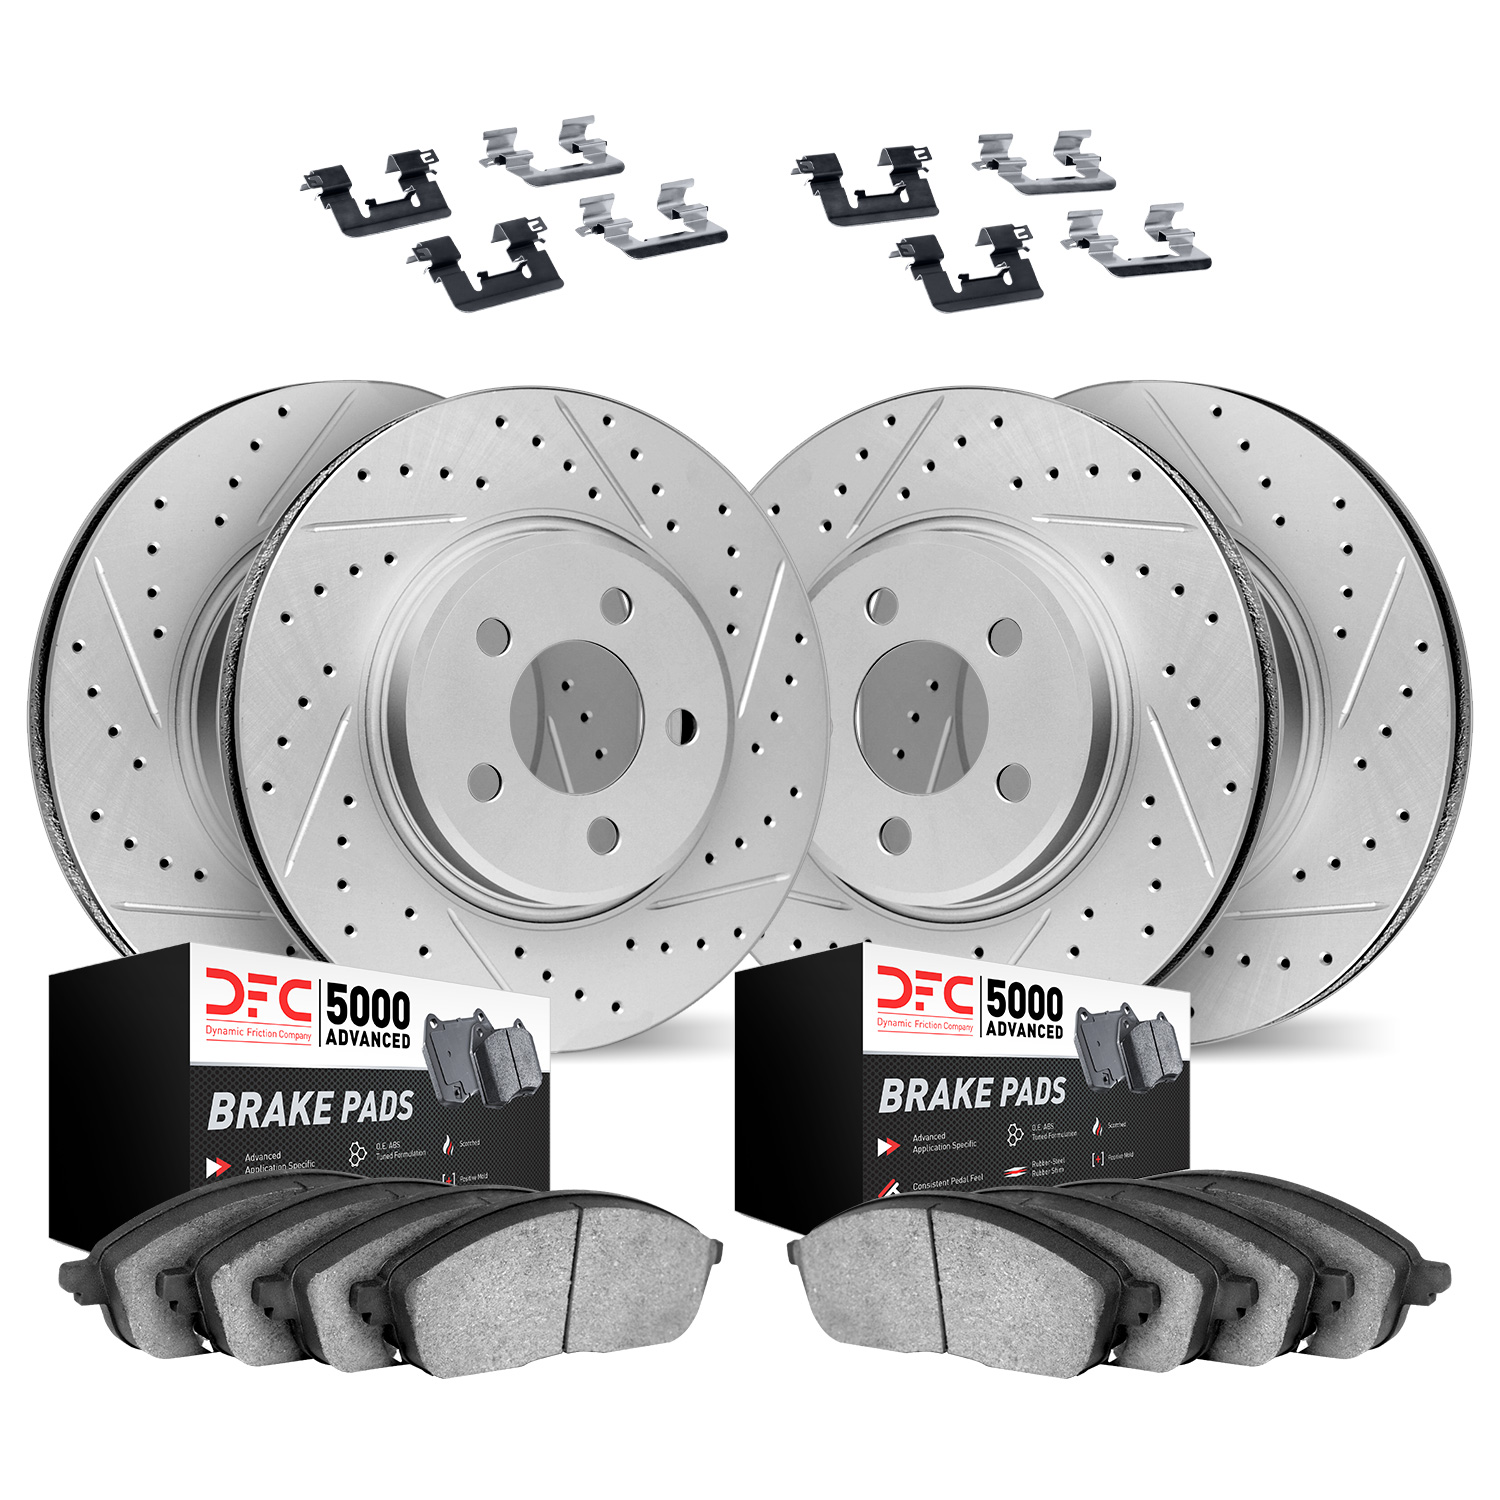 2514-31050 Geoperformance Drilled/Slotted Rotors w/5000 Advanced Brake Pads Kit & Hardware, 2017-2019 Mini, Position: Front and